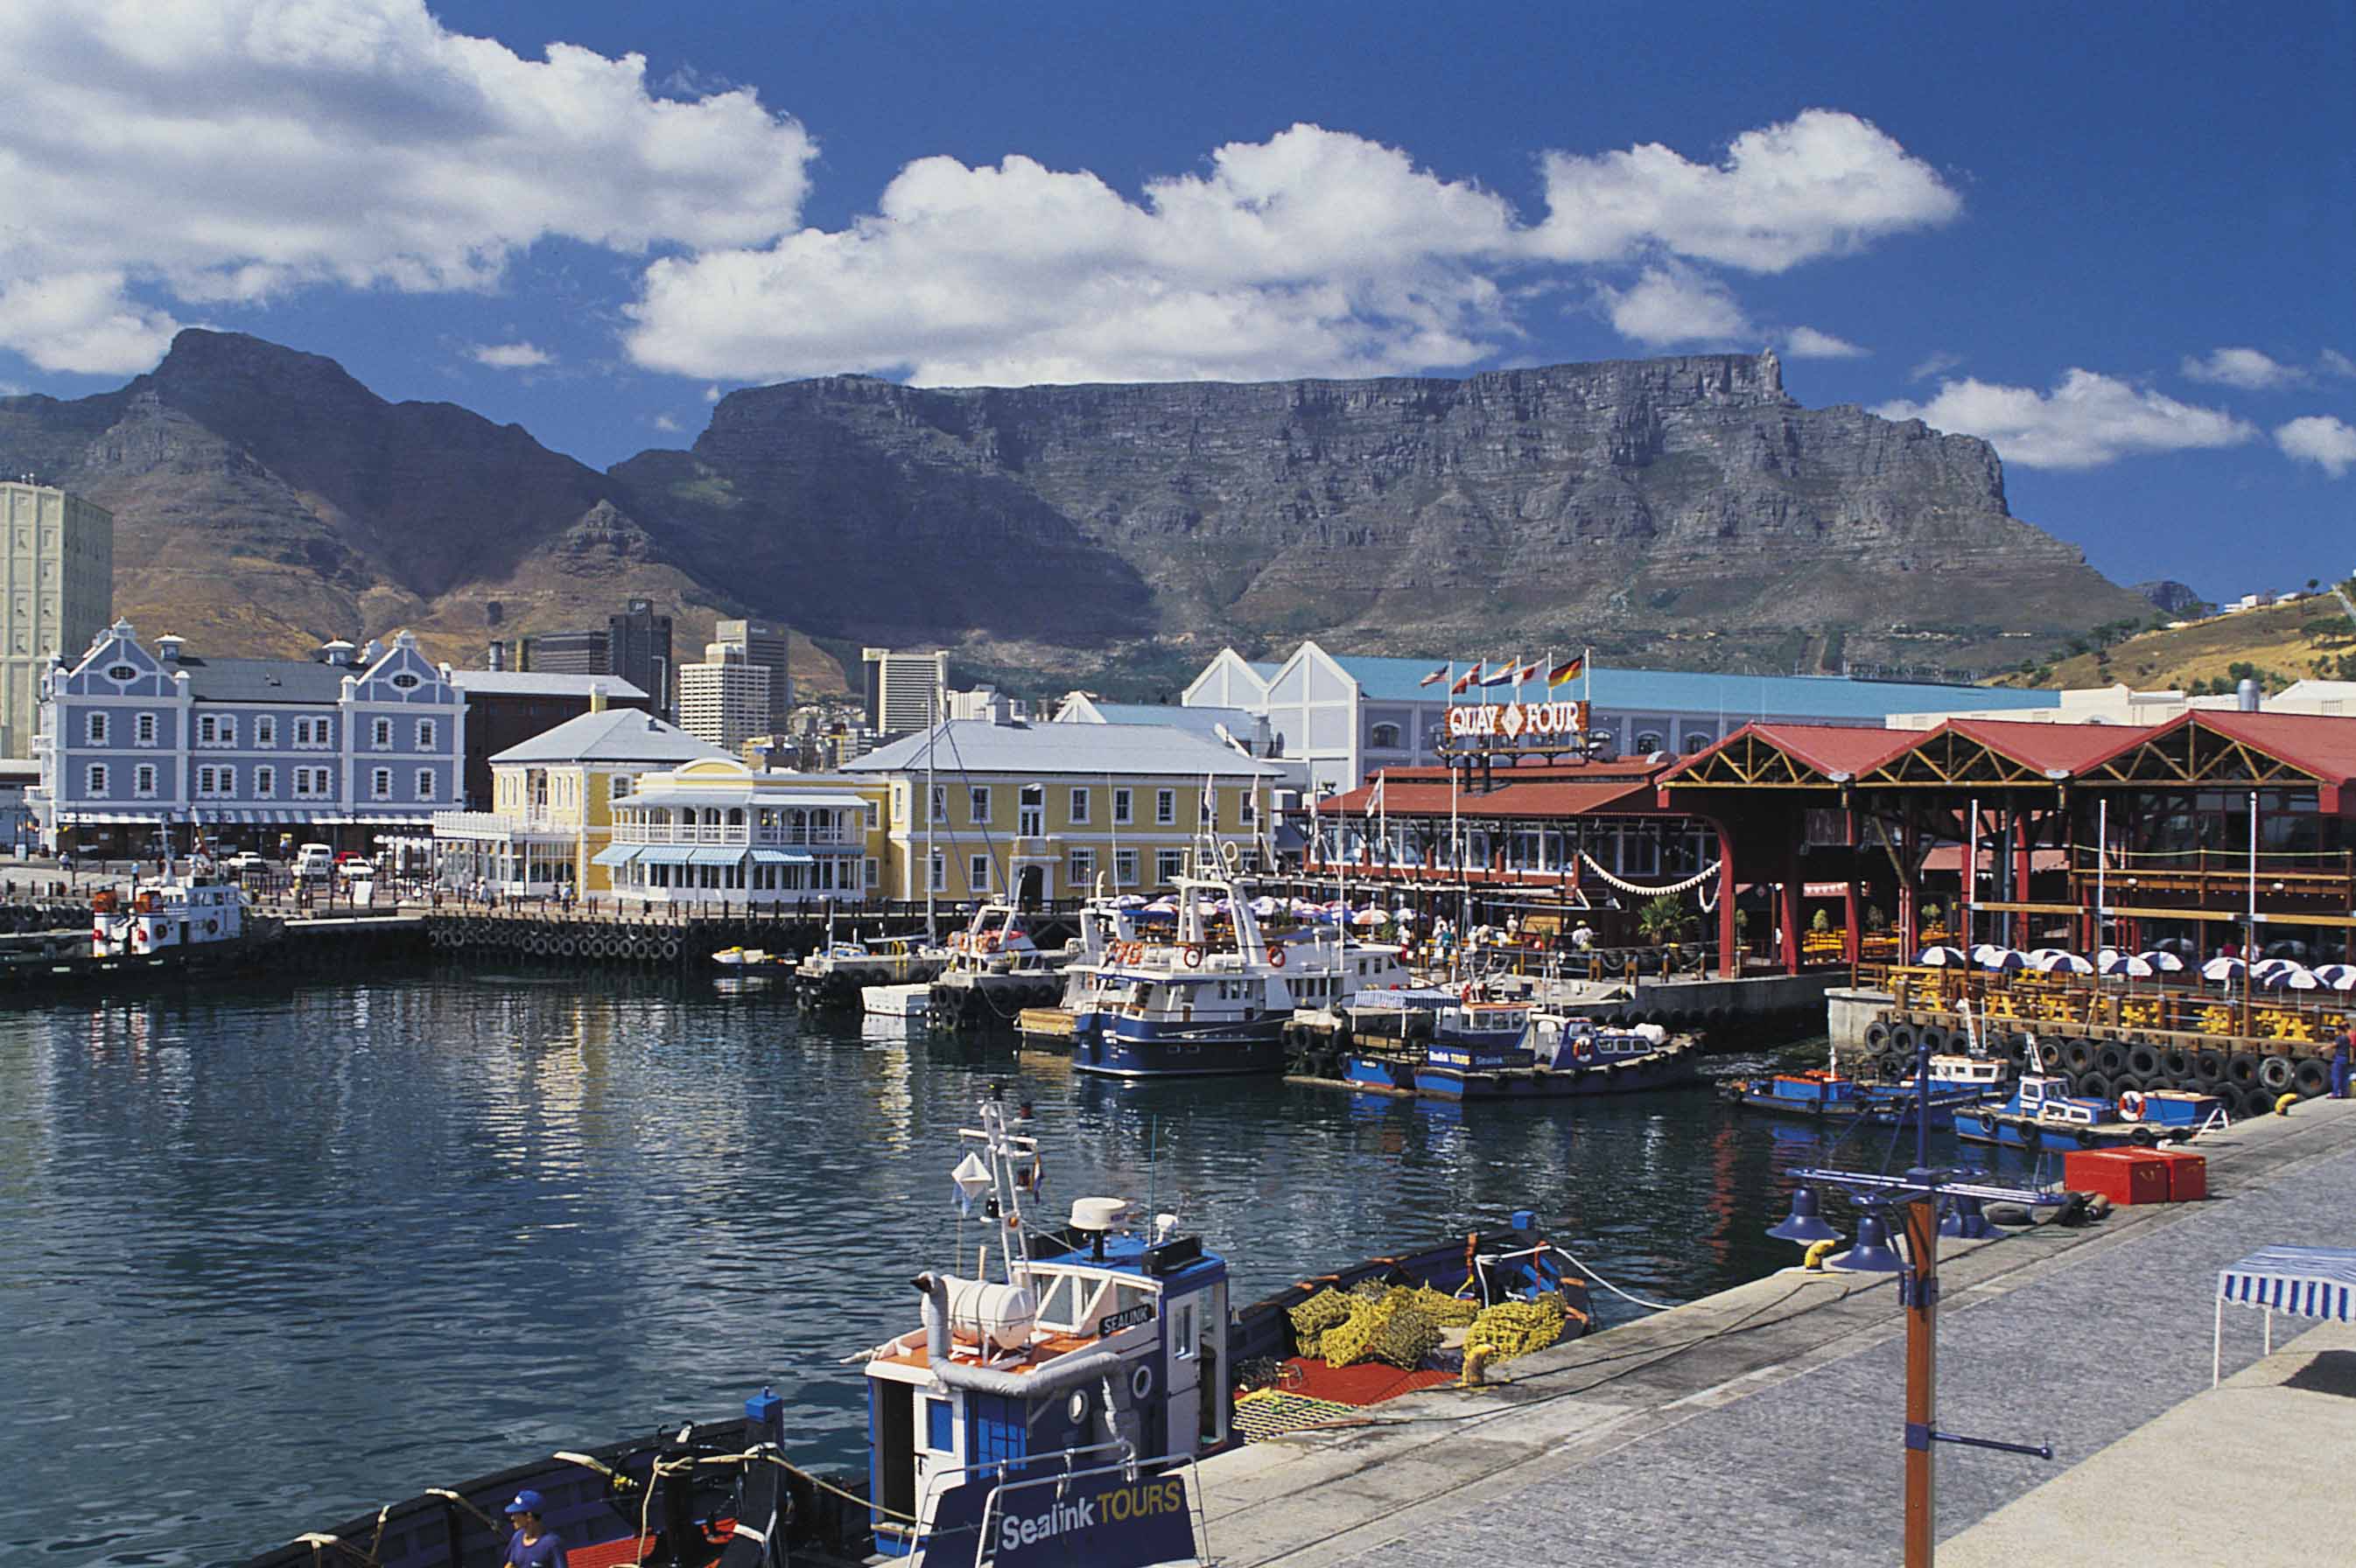 Calvin Klein comes to the V&A Waterfront!